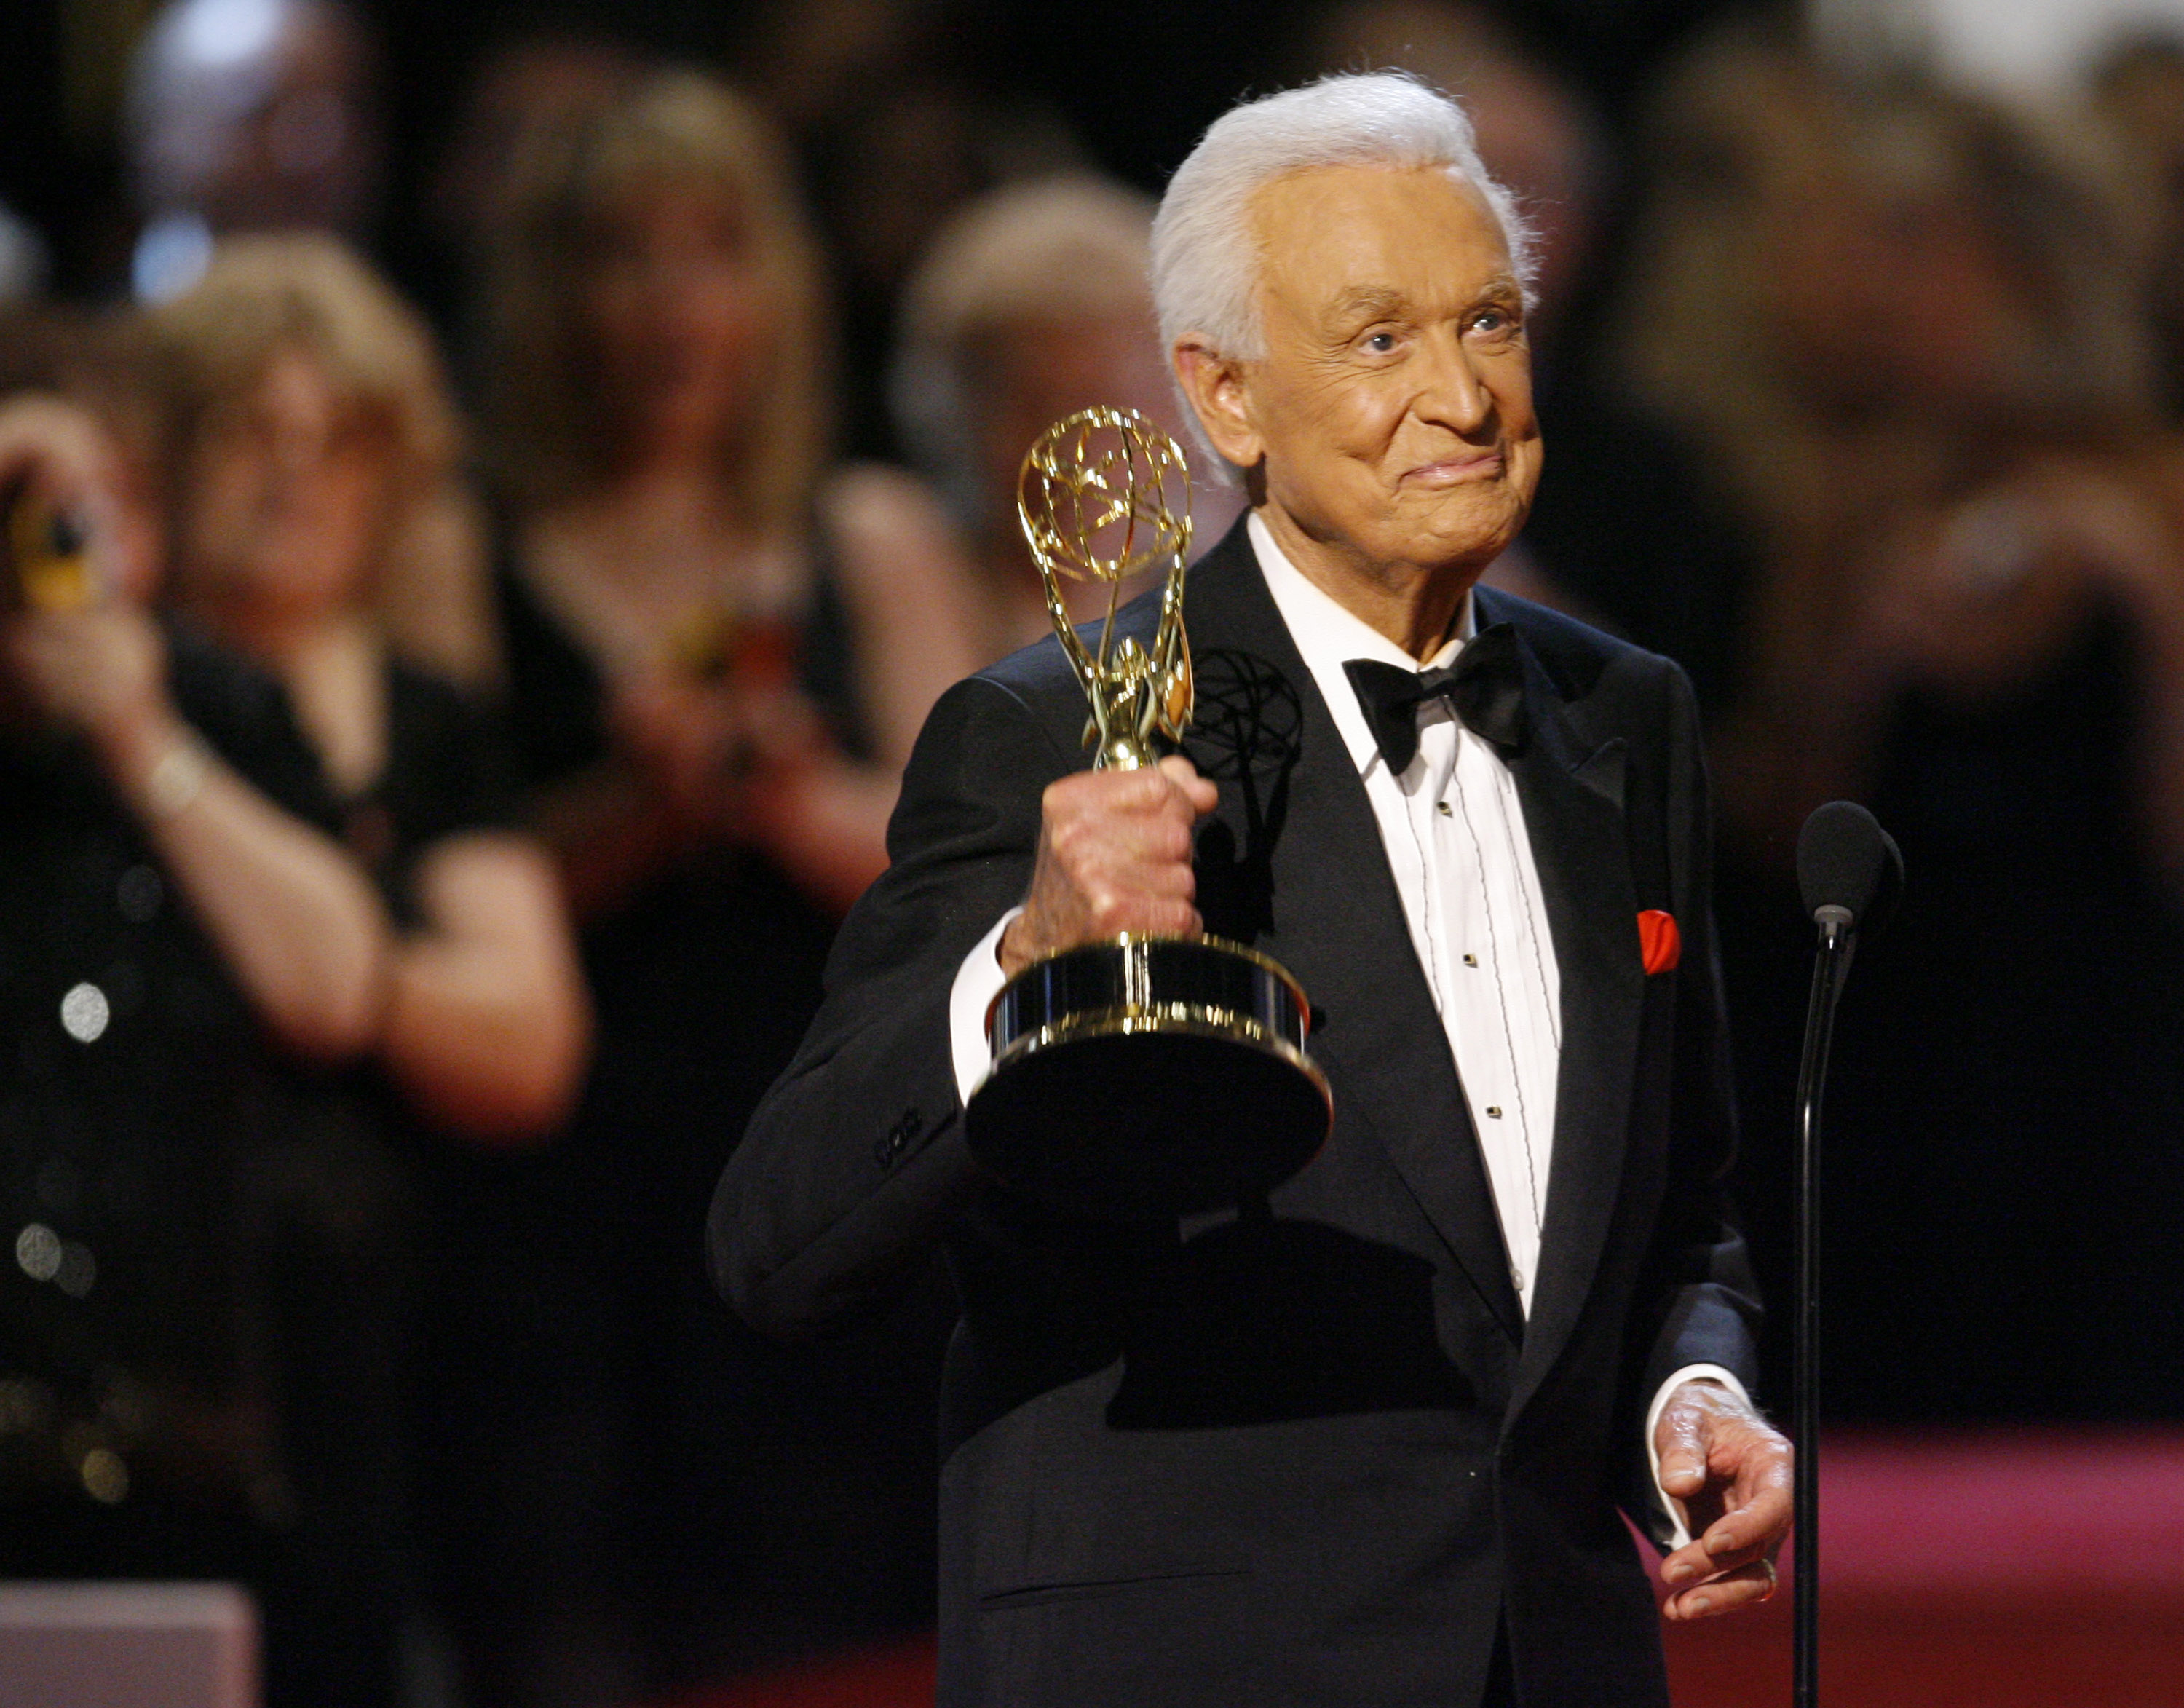 Bob Barker accepts Outstanding Game Show Host award for "The Price is Right" | Source: Getty Images